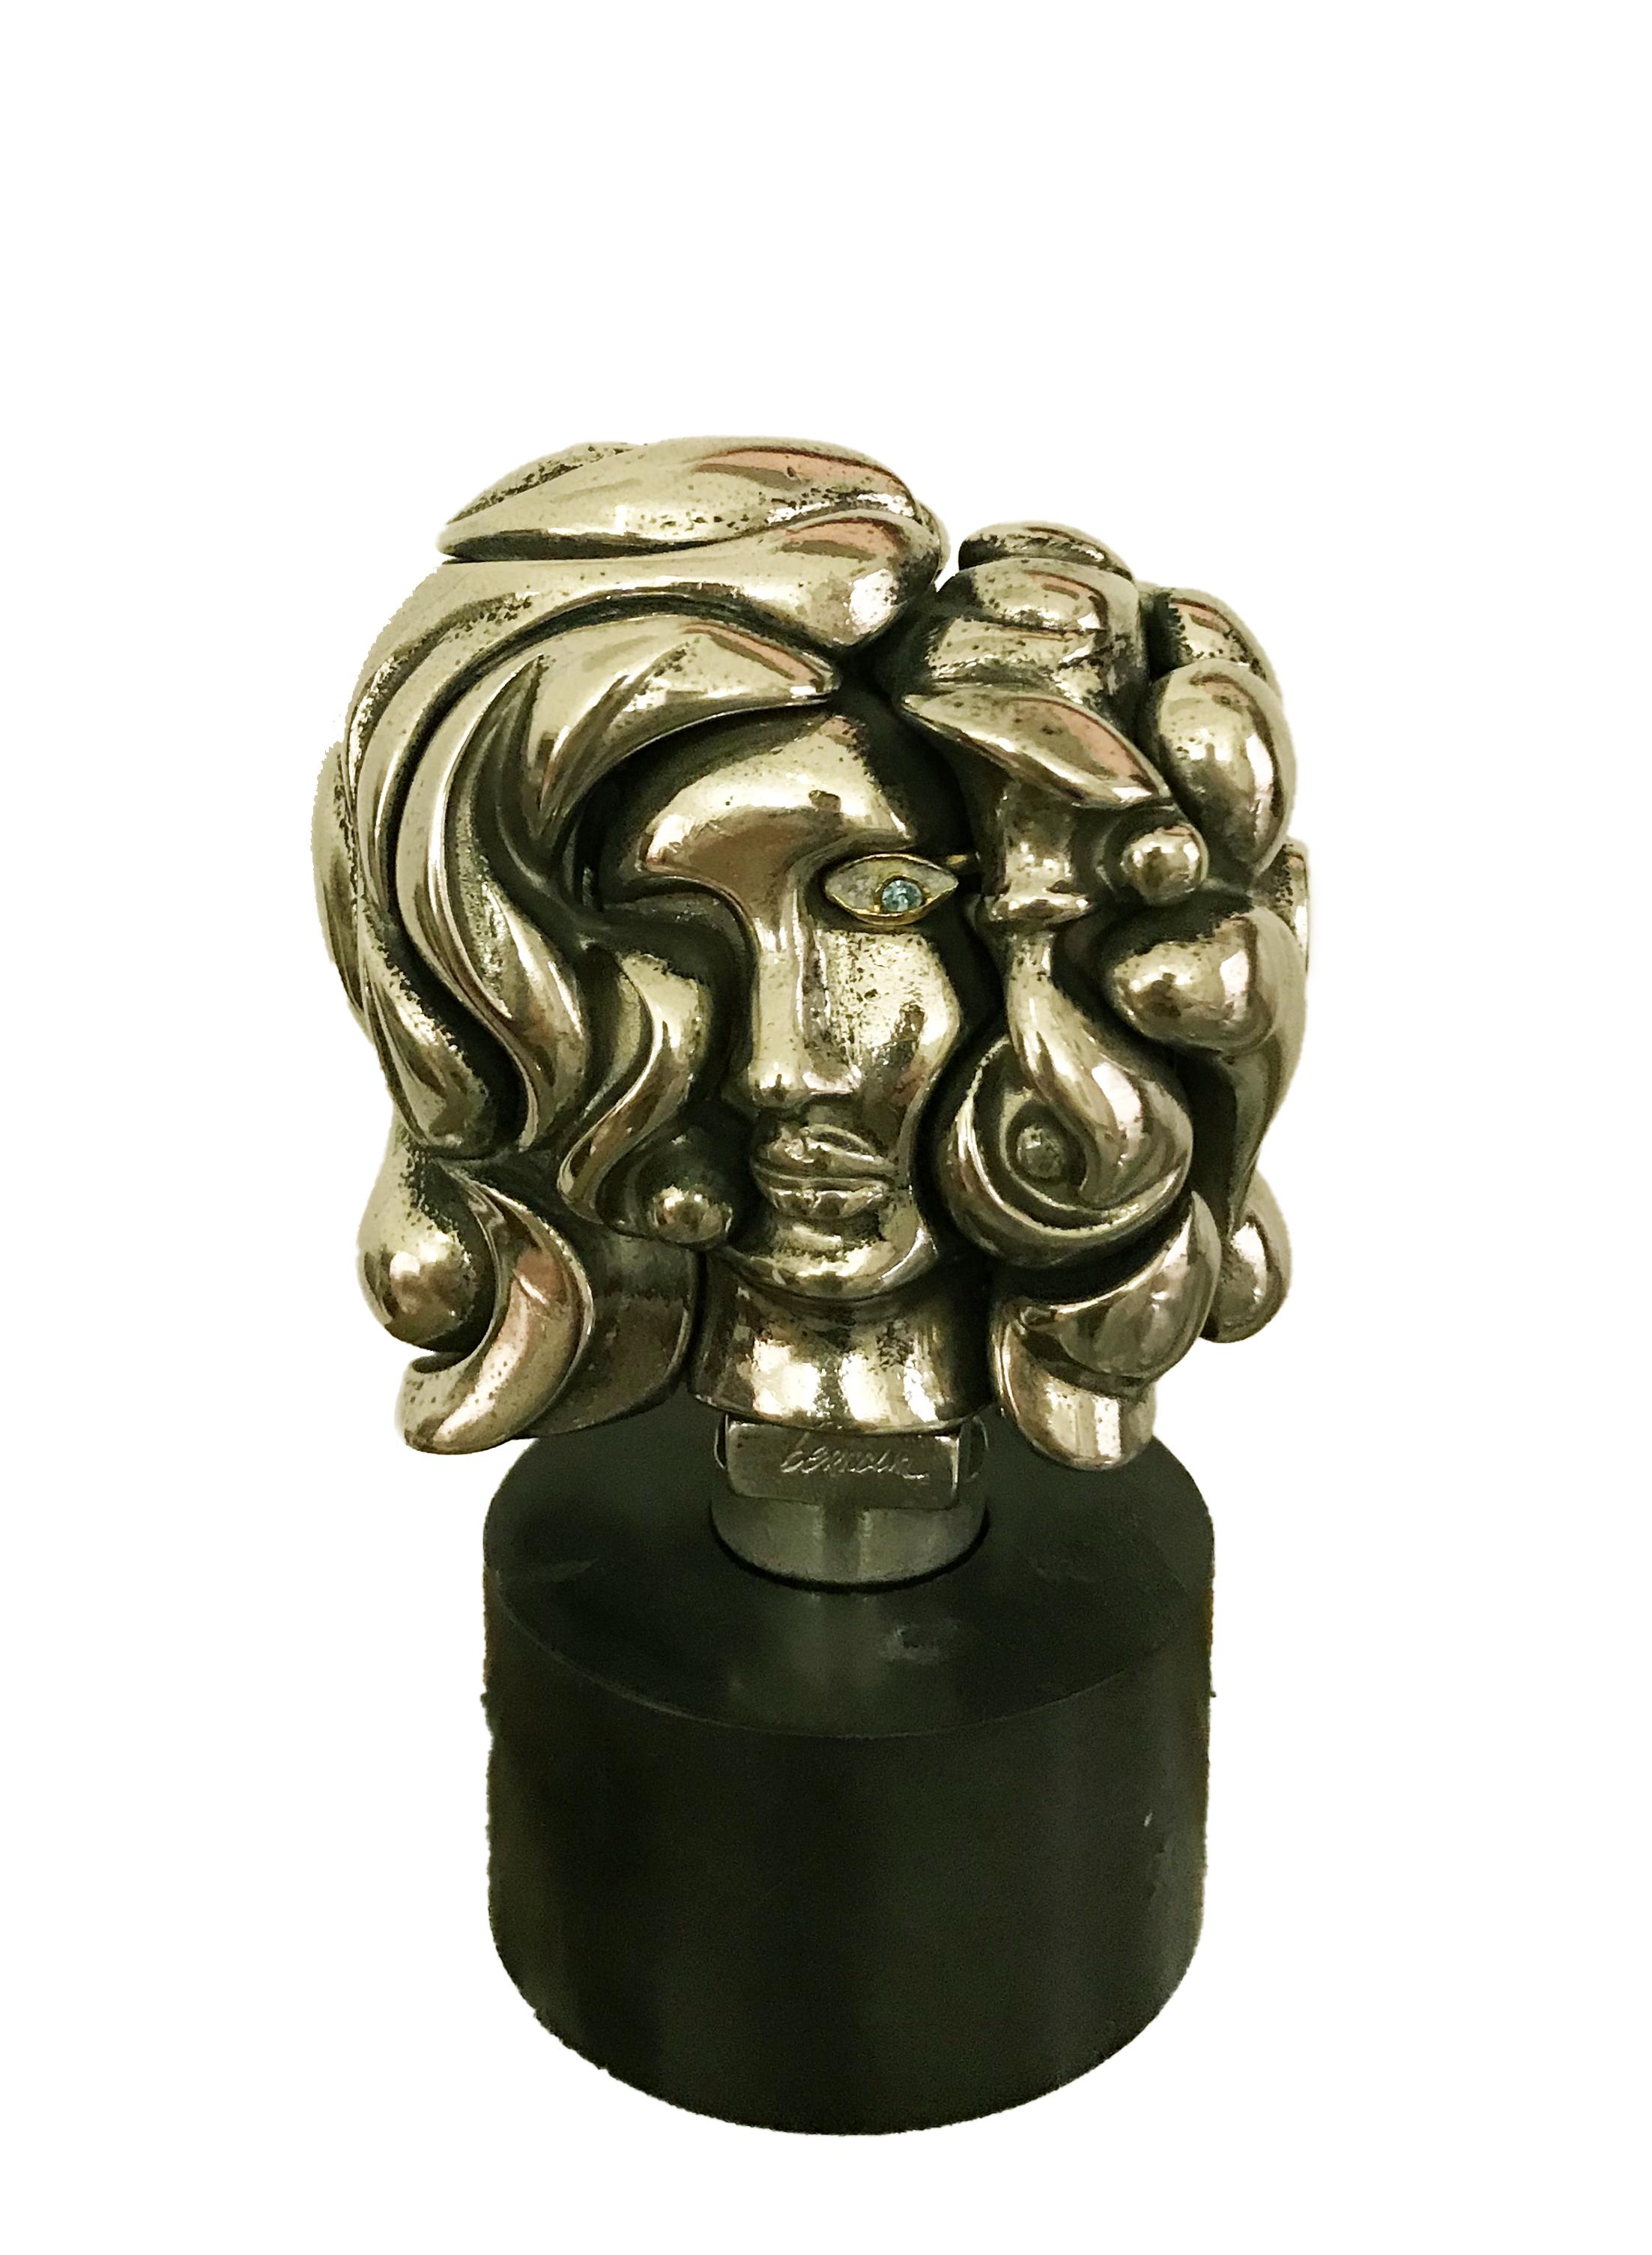 Portrait of Michele - Original Nickel Plated Sculpture by M. Berrocal - 1969 - Black Figurative Sculpture by Miguel Berrocal